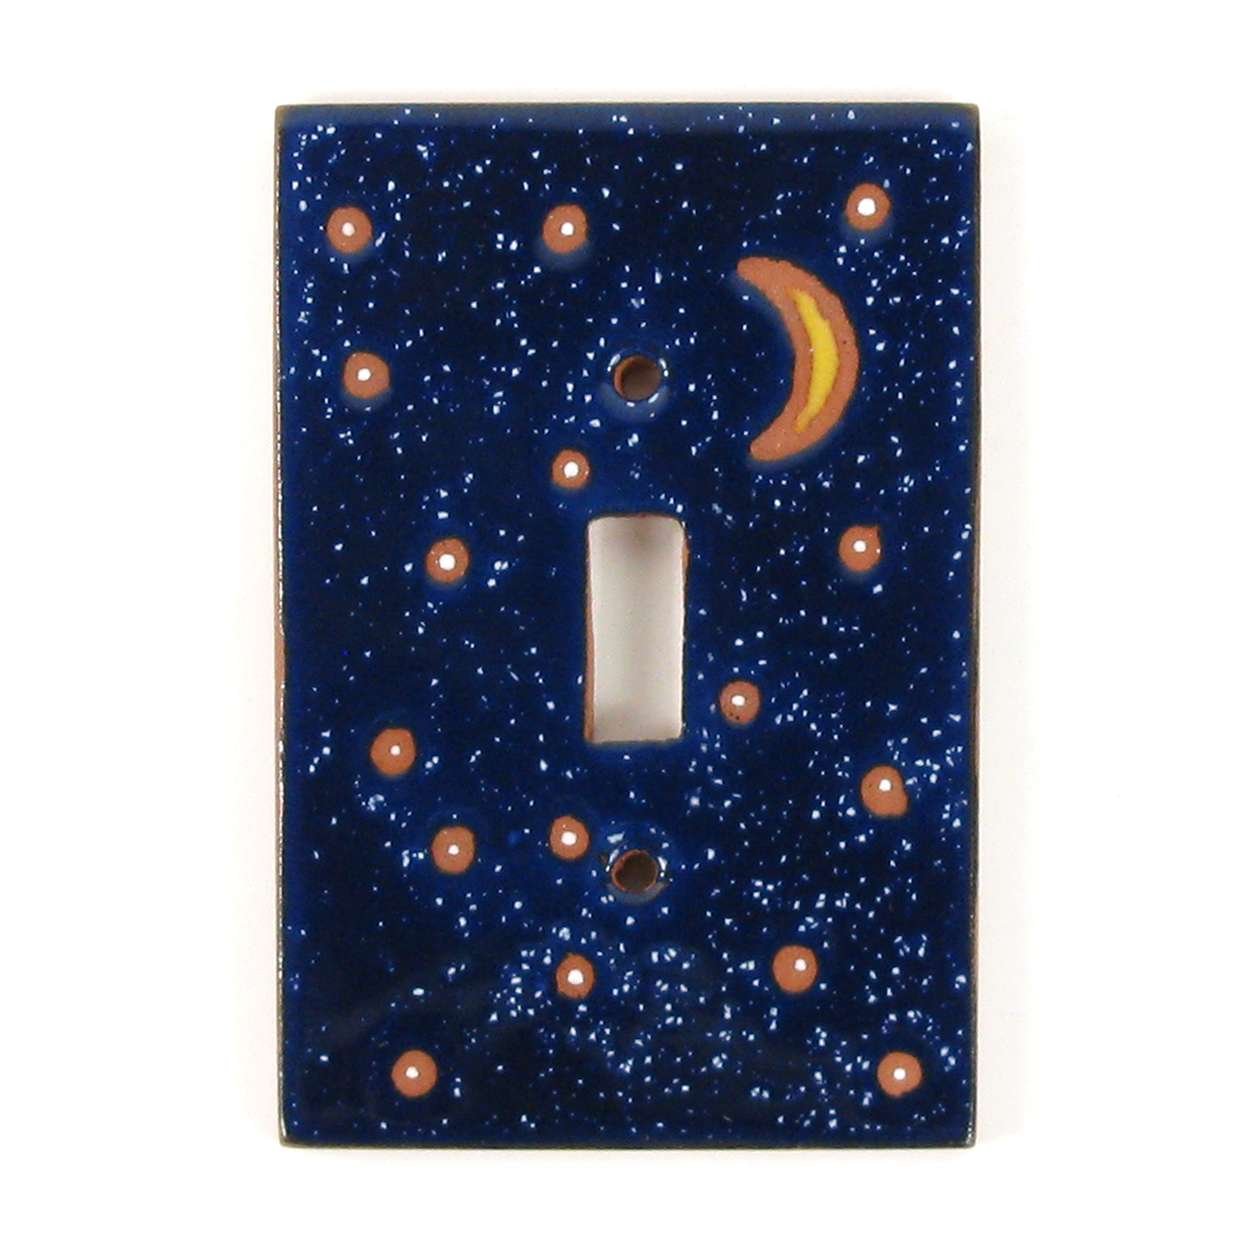 Terra Cotta Single Toggle Switch Plate - Sparkly Moon